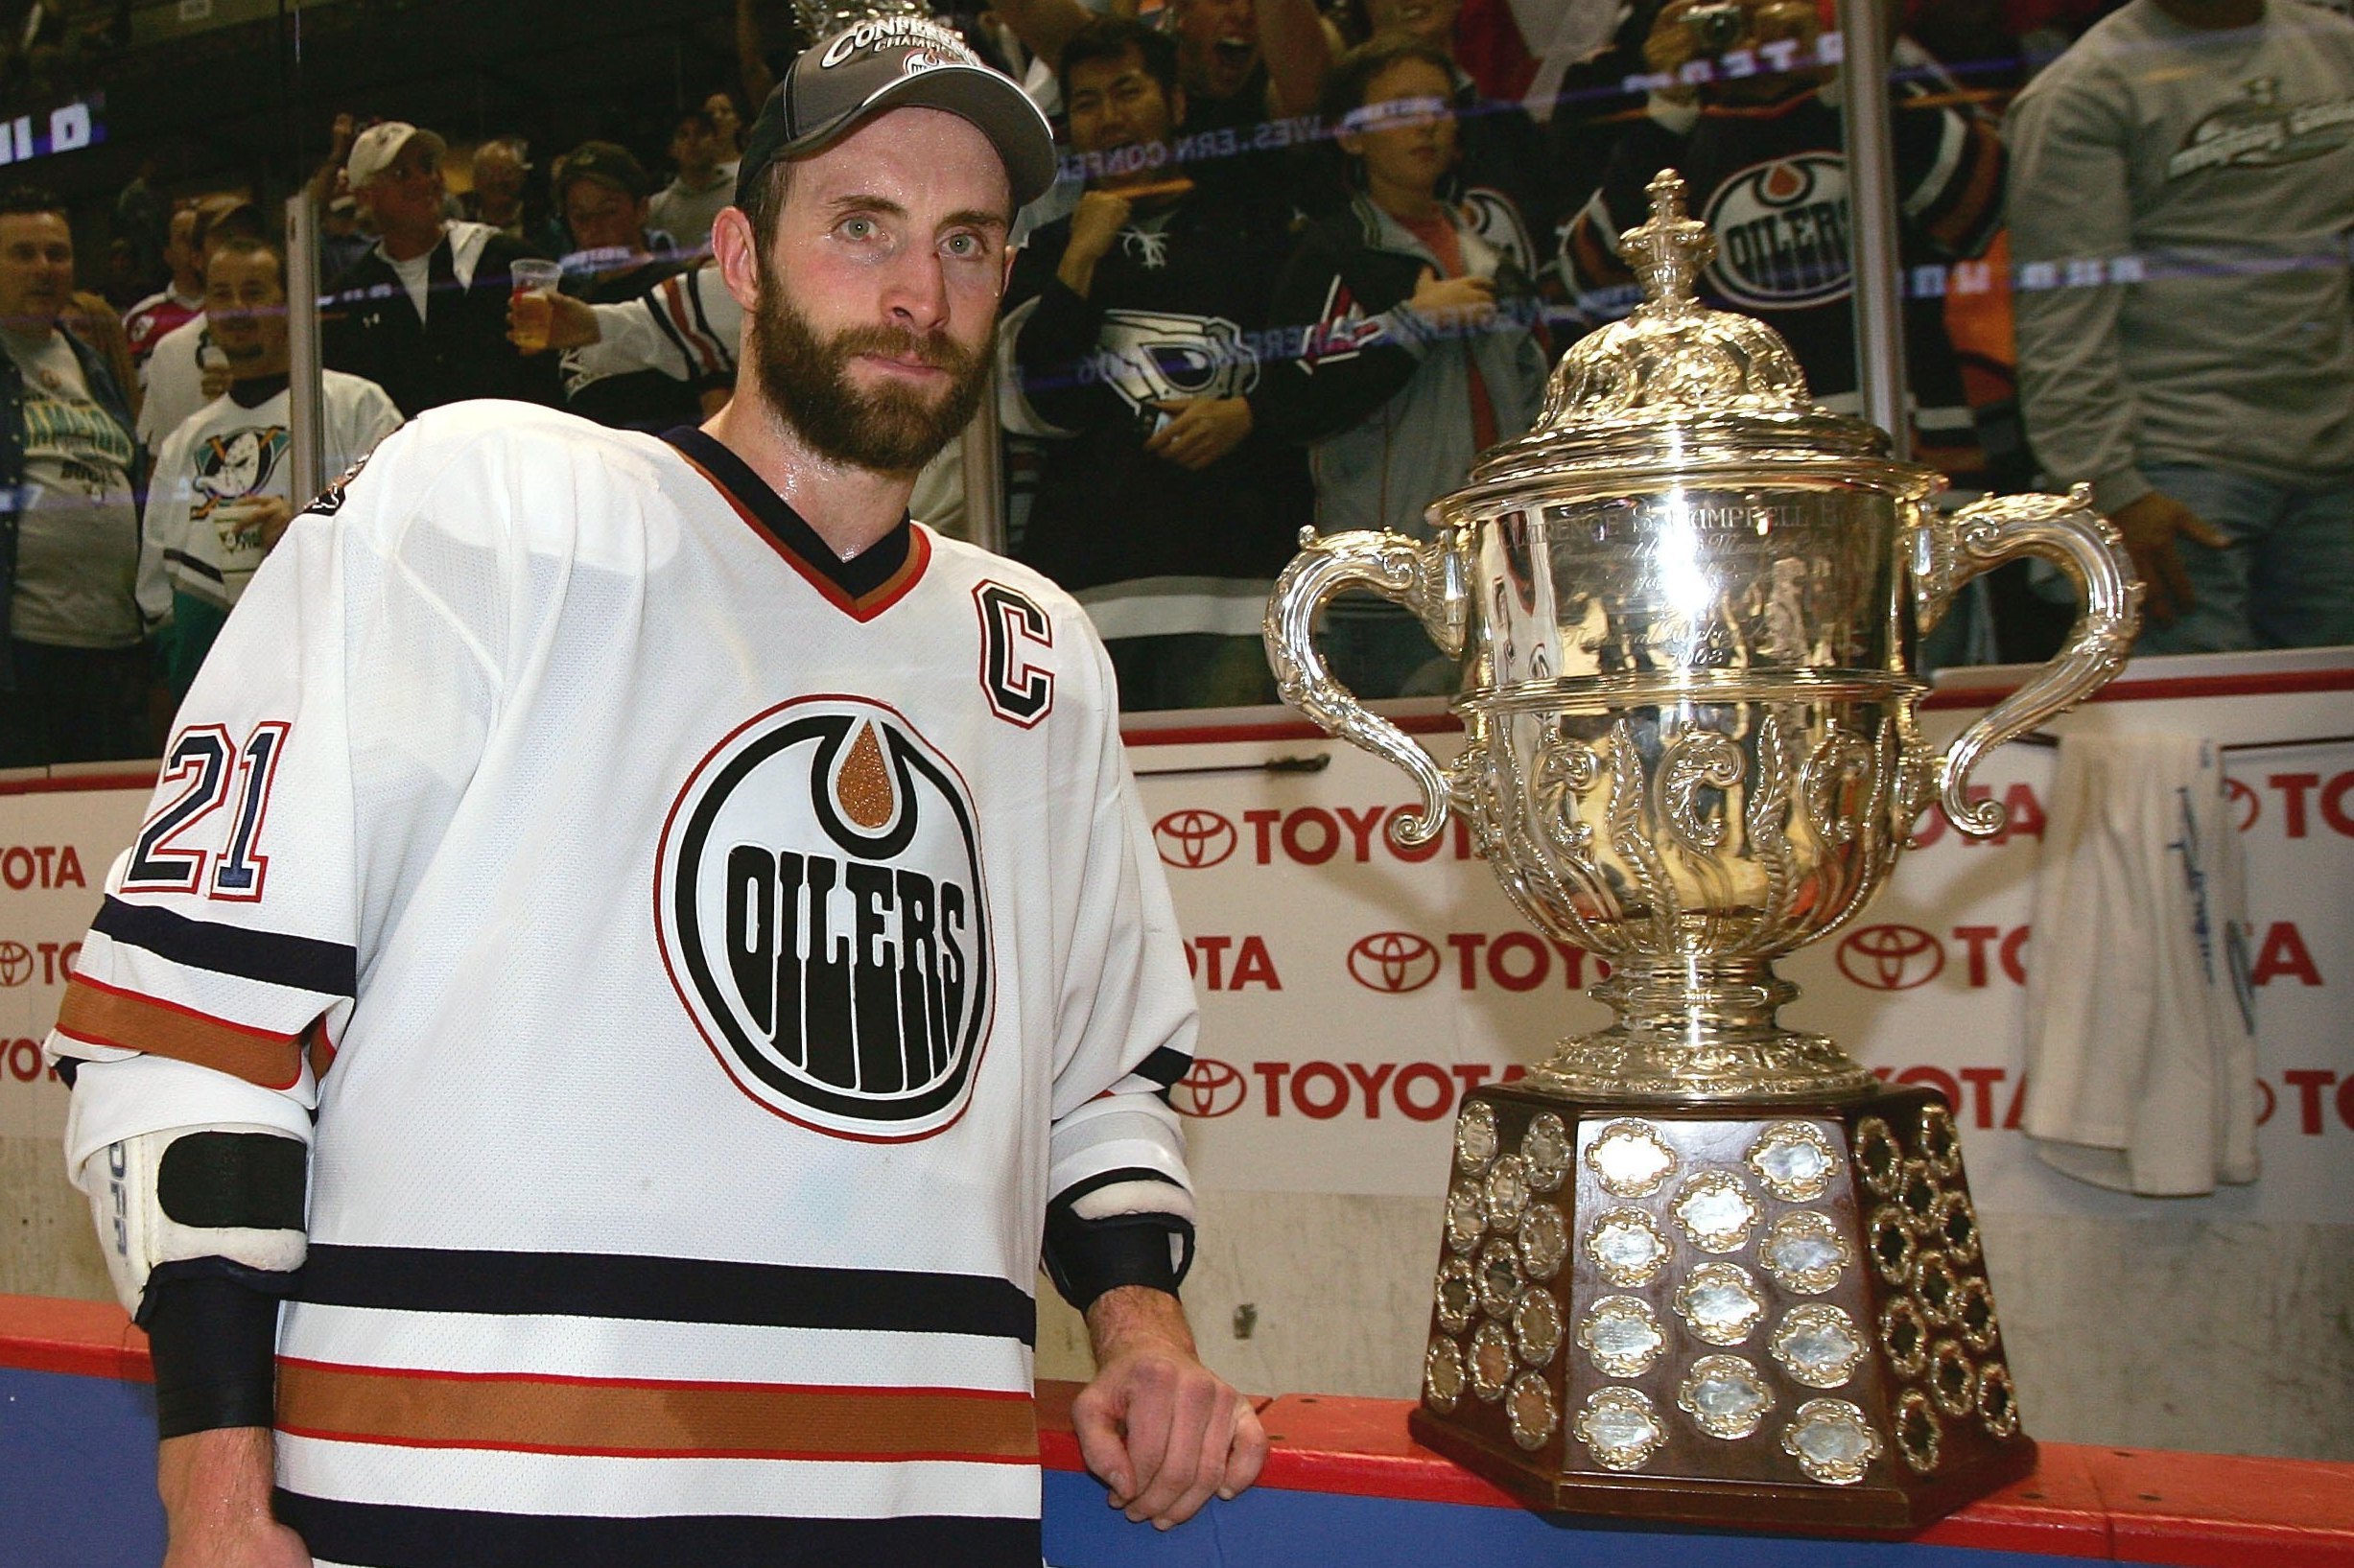 SHOULD THE OILERS BRING BACK JASON SMITH?